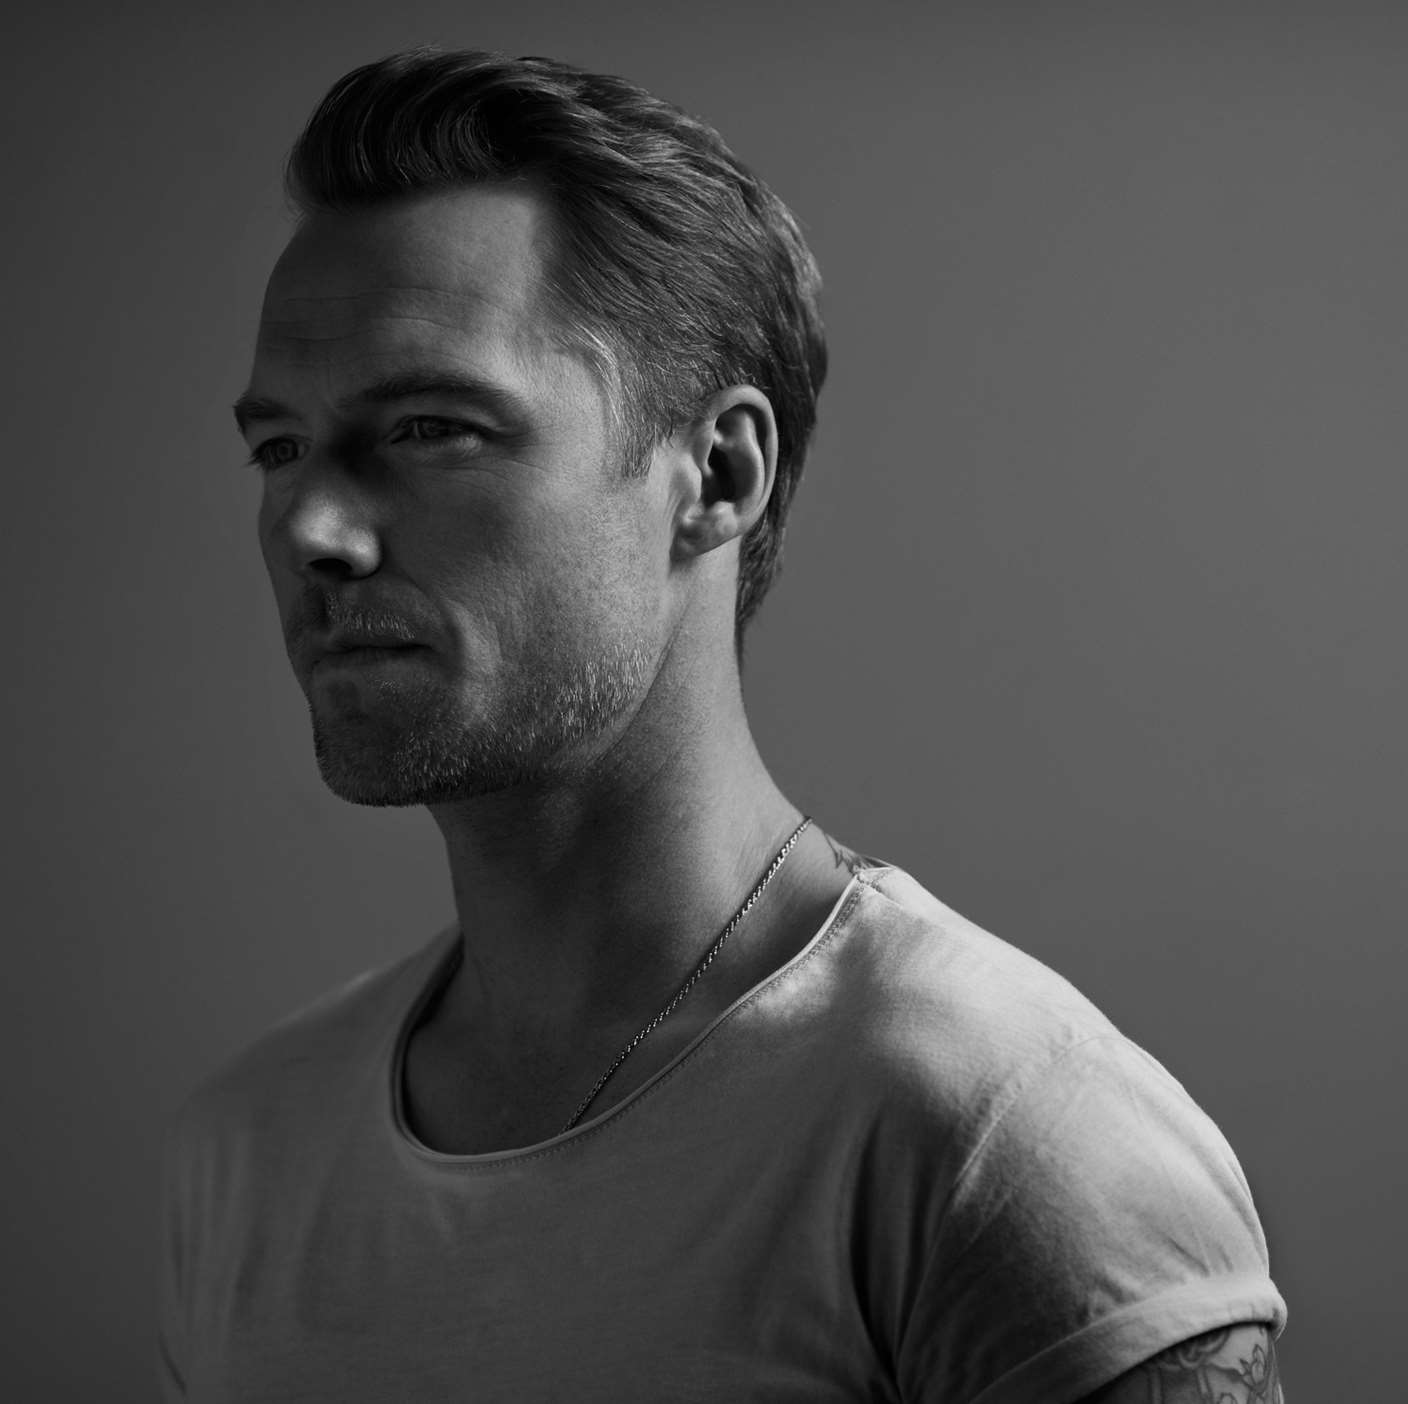 Ronan Keating will be playing the Castle Concerts 2018